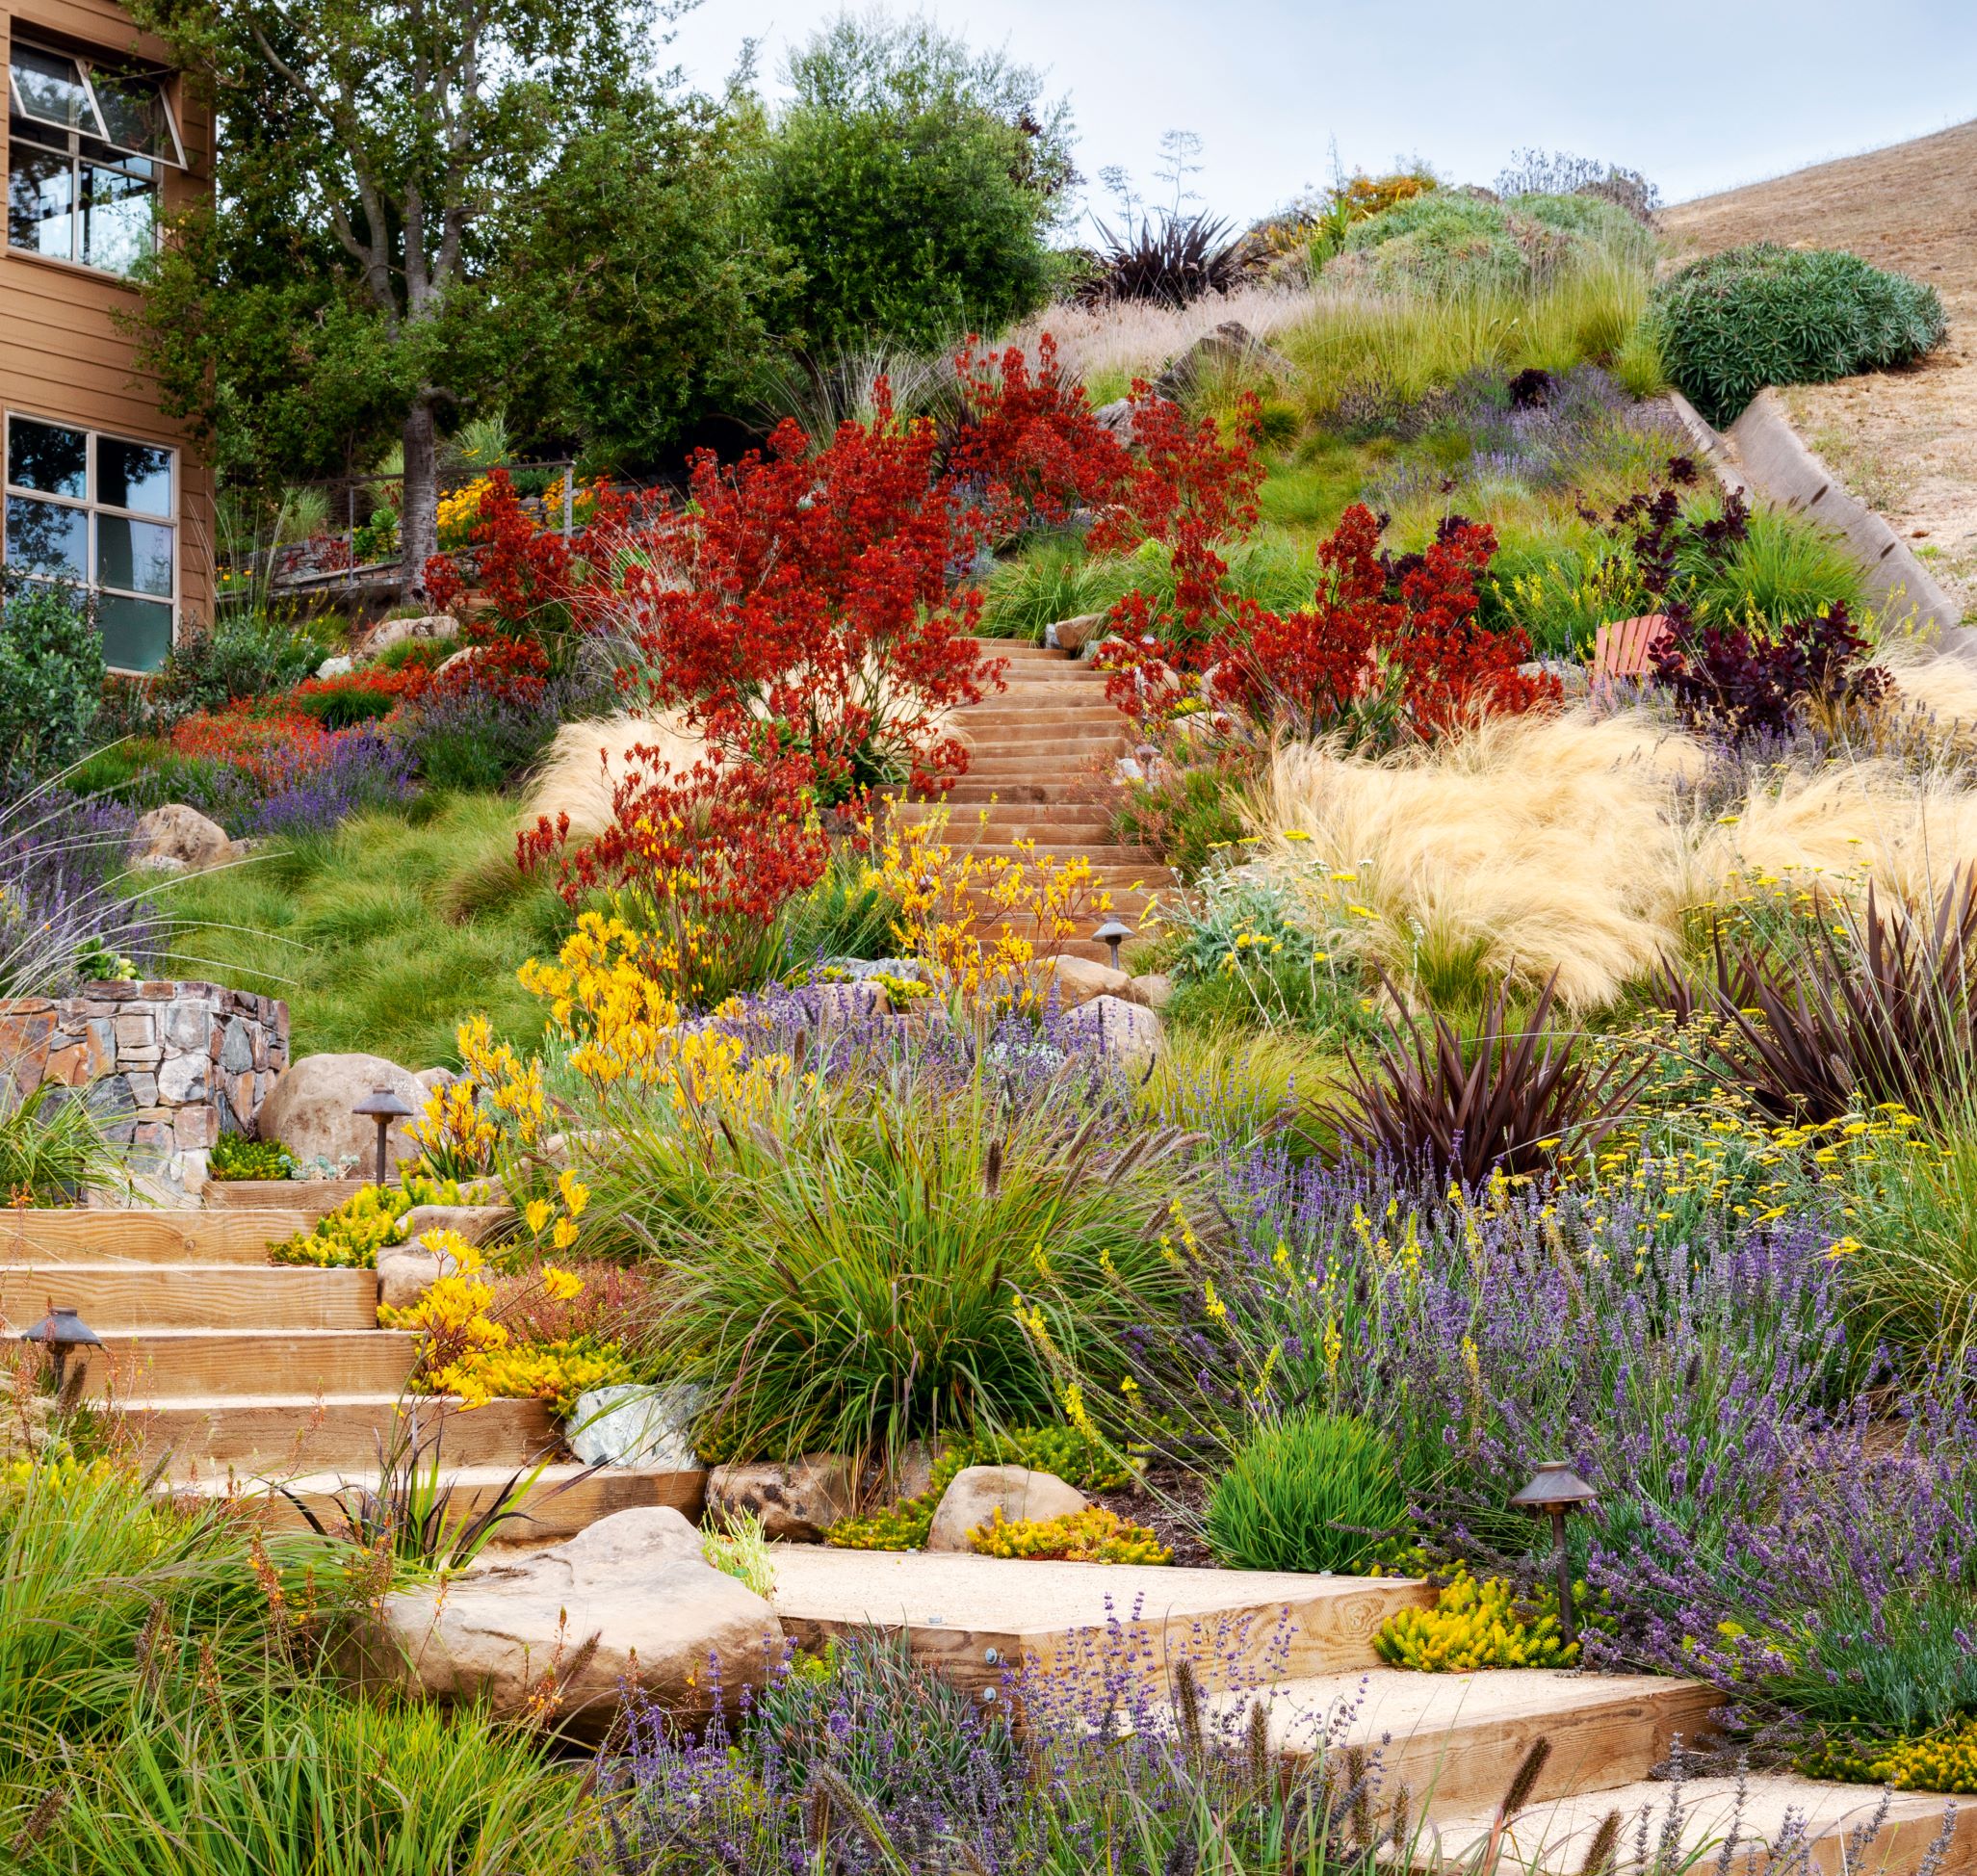 Xeriscape Garden. Garden at Tiburon, in the San Francisco Bay area of California, USA, a planting scheme by Arterra Landscape Architects. Photo courtesy Arterra Landscape Architects/Michele Lee Willson Photography (page 290) Xero is the Greek word for ‘dry’, and xeriscape is a garden-design style that reduces or eliminates the need for supplementary irrigation or watering